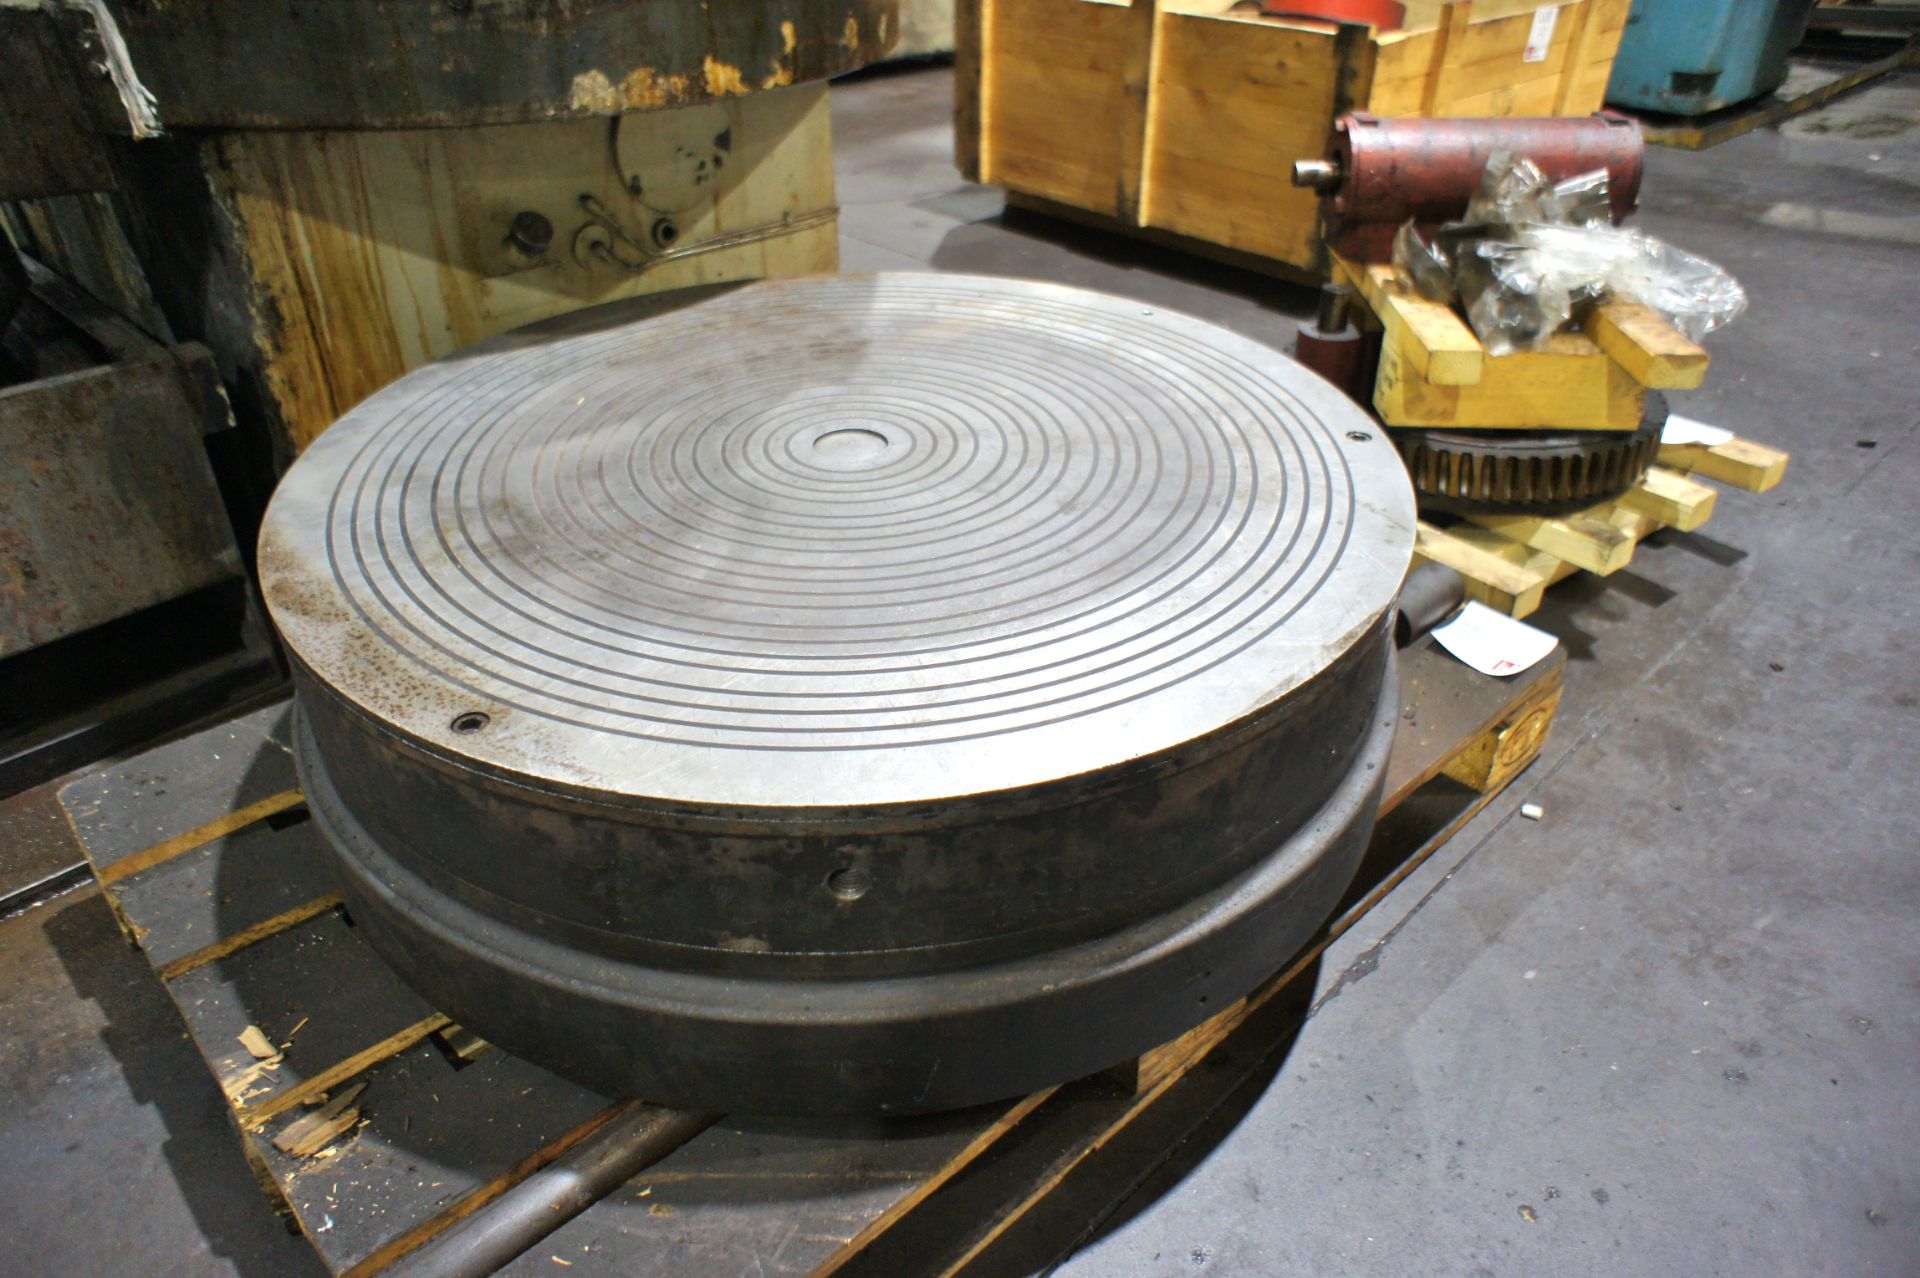 Lumsden 36" magnetic chuck with associated gearbox